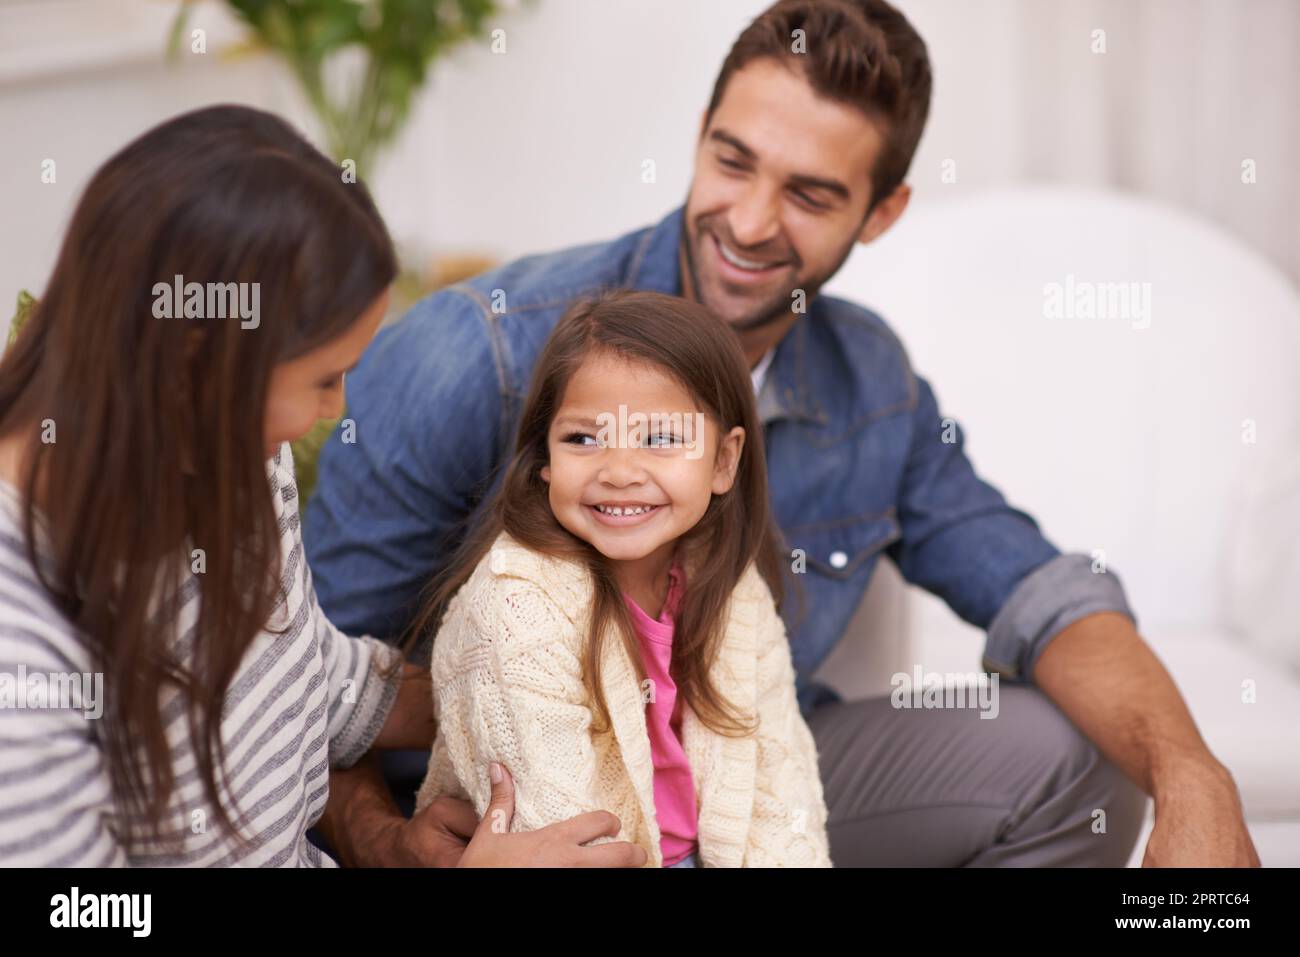 Relaxing with the ones you love. a happy young family sitting together at home. Stock Photo